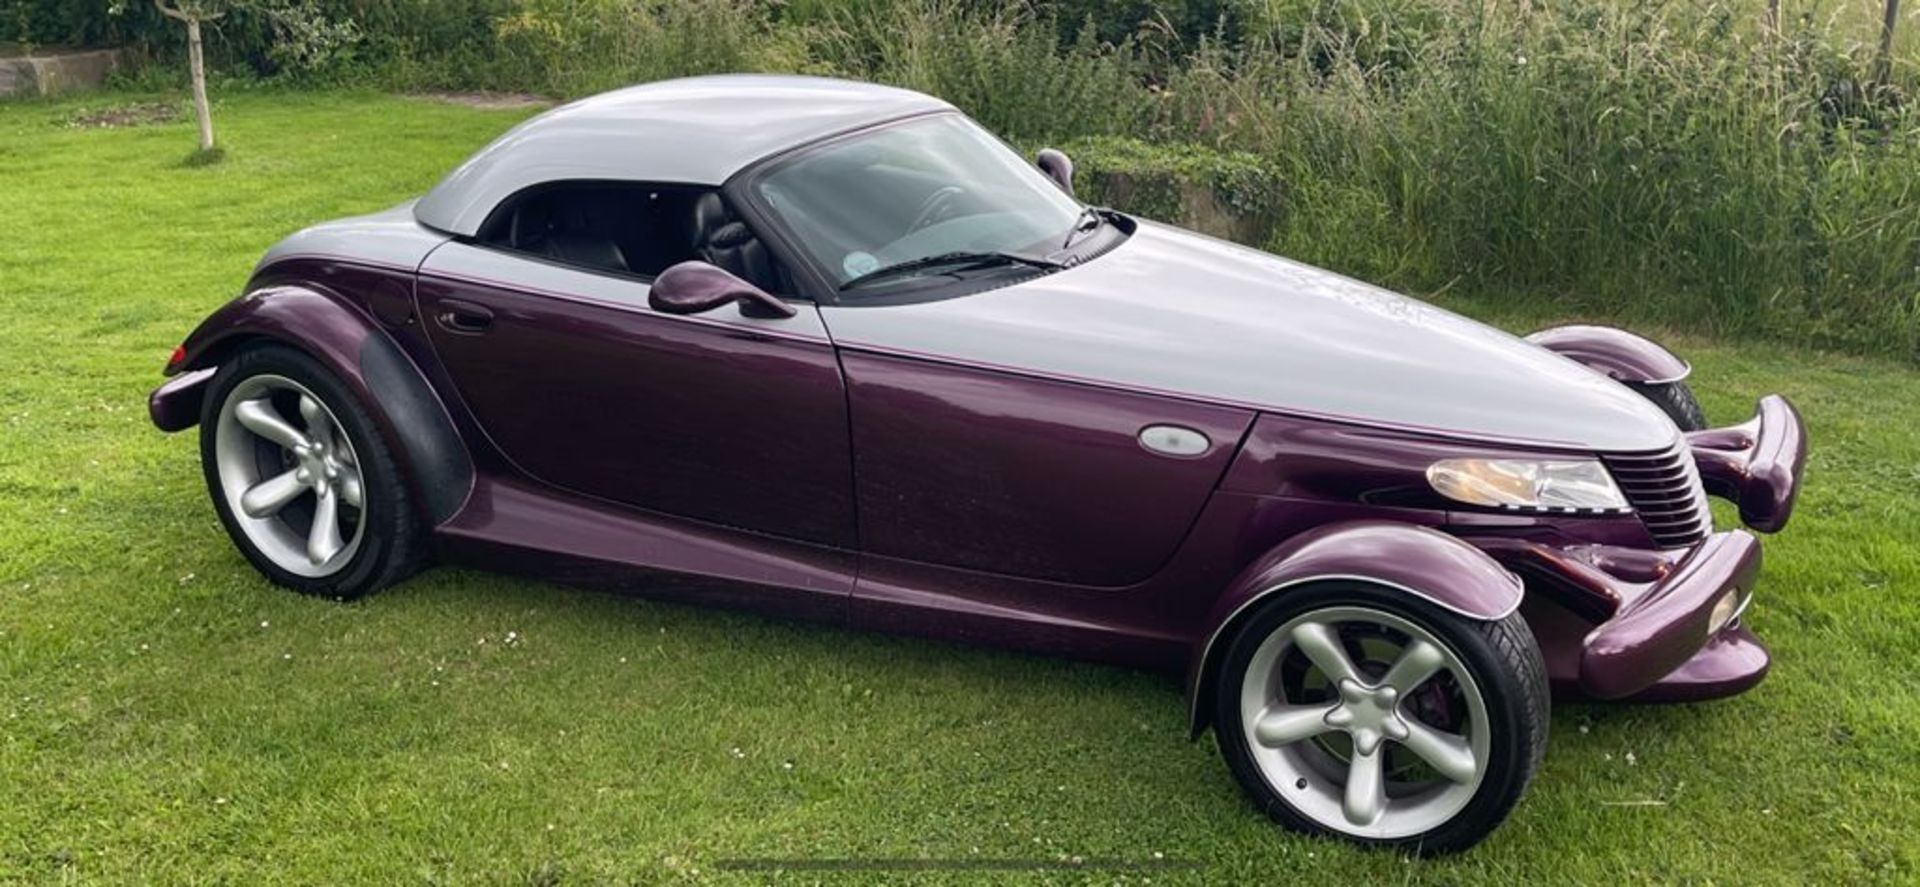 1998 CHRYSLER PLYMOUTH PROWLER V6 2 DOOR CONVERTIBLE, 3500cc PETROL ENGINE, AUTO *NO VAT* - Image 15 of 27